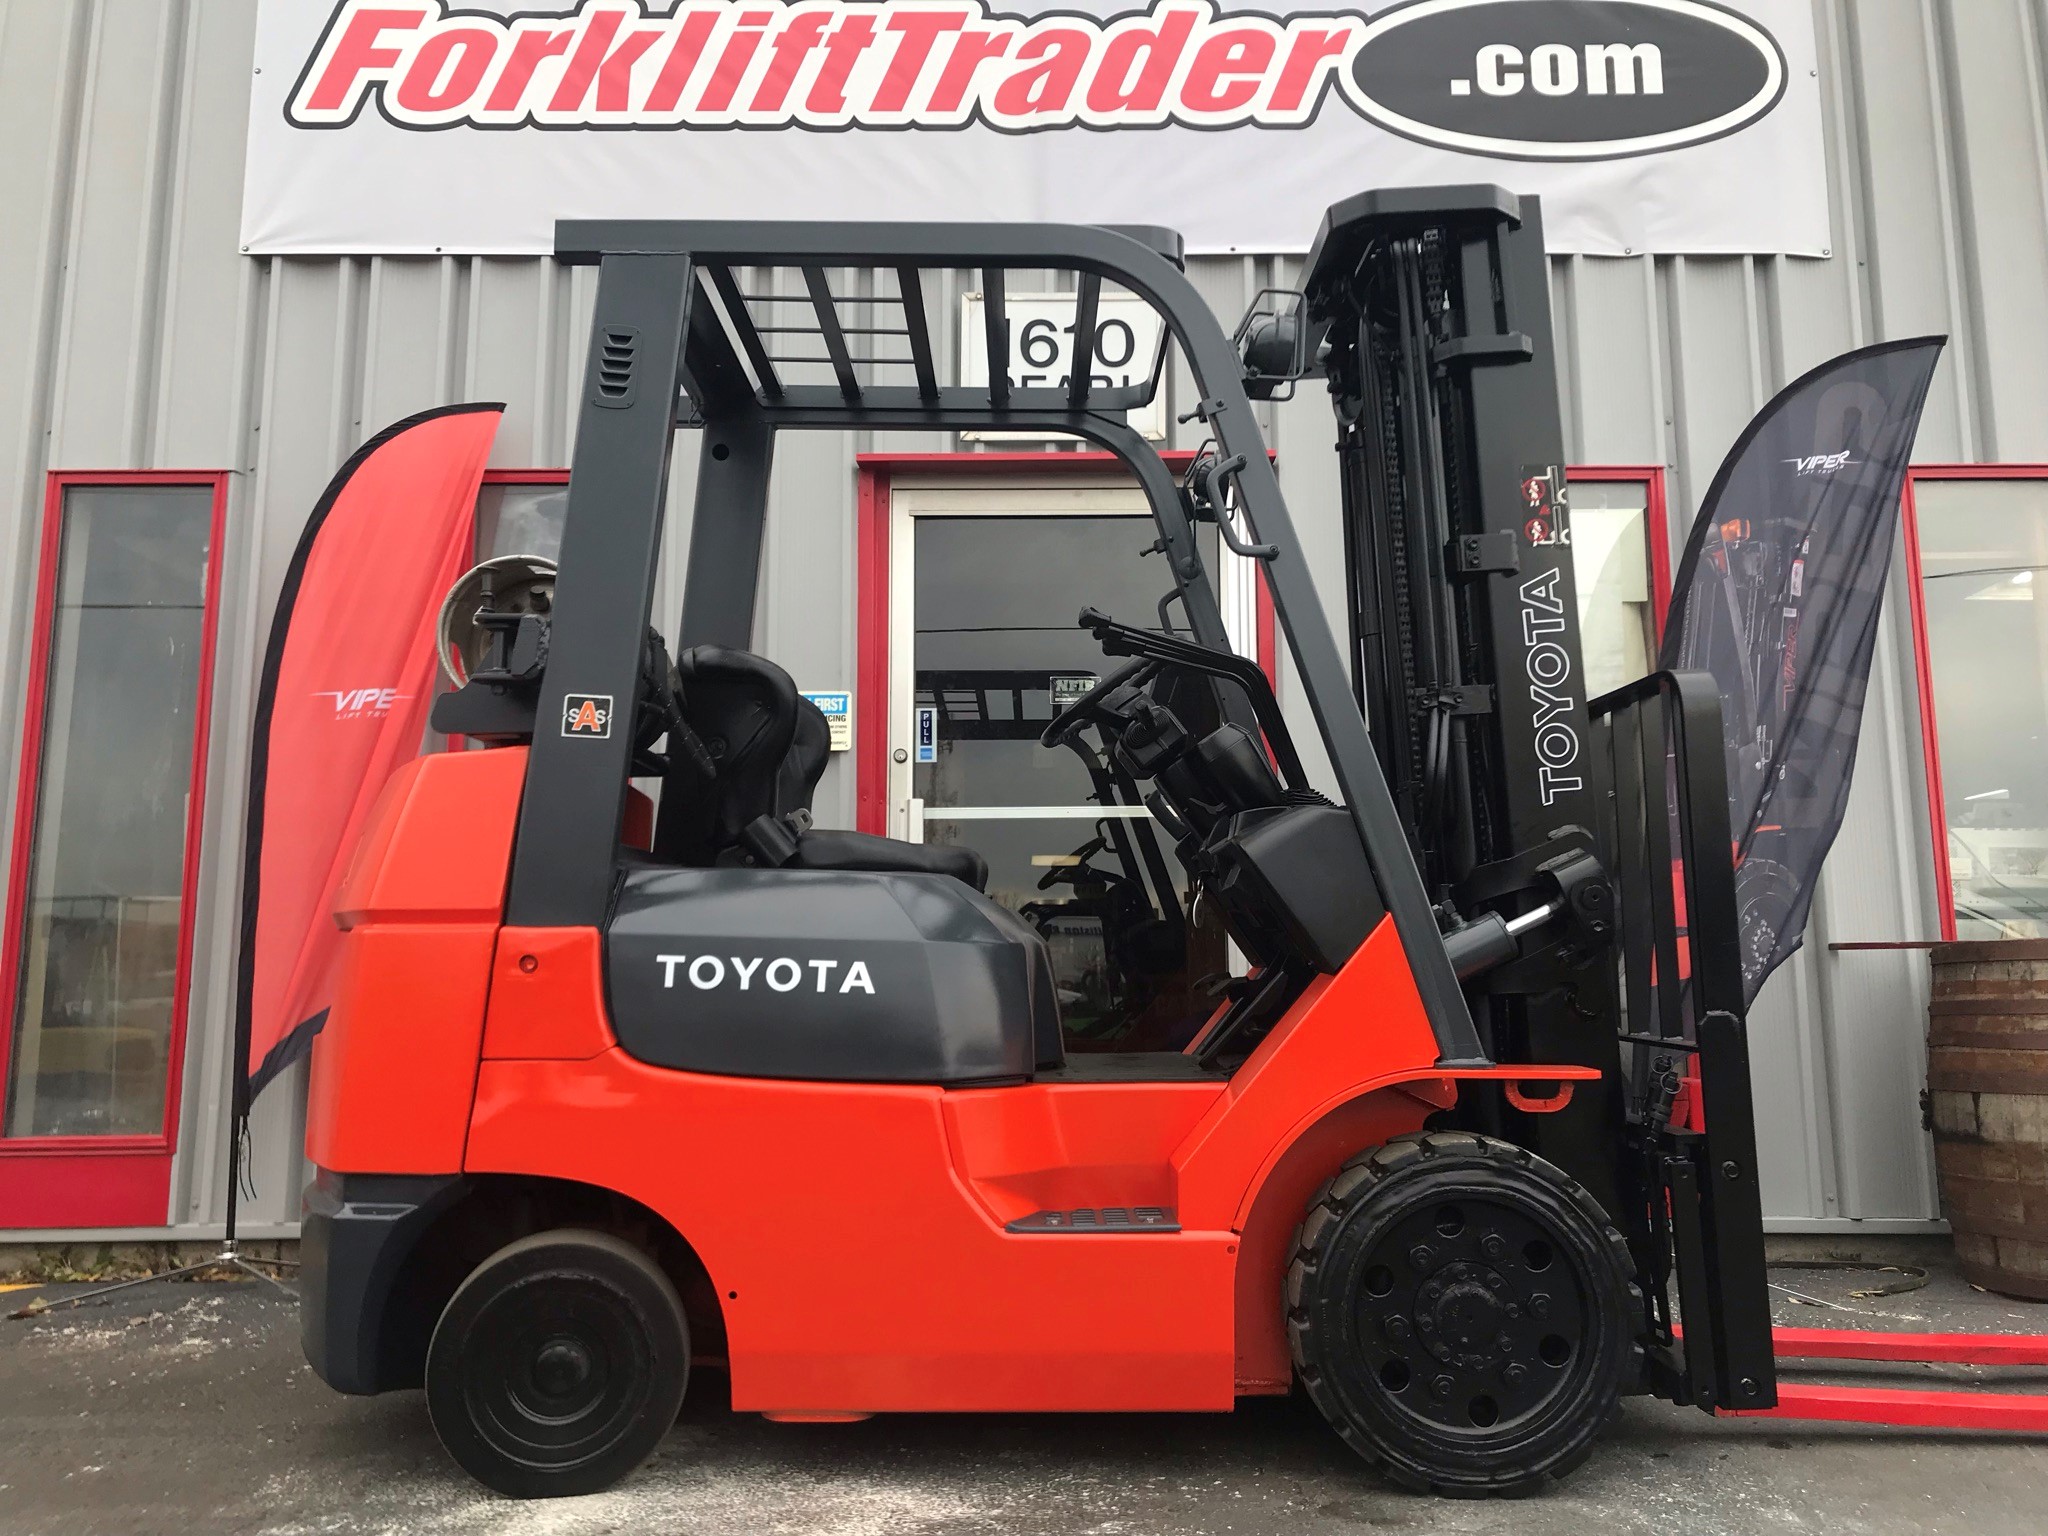 Cushion tires 2004 toyota forklift for sale